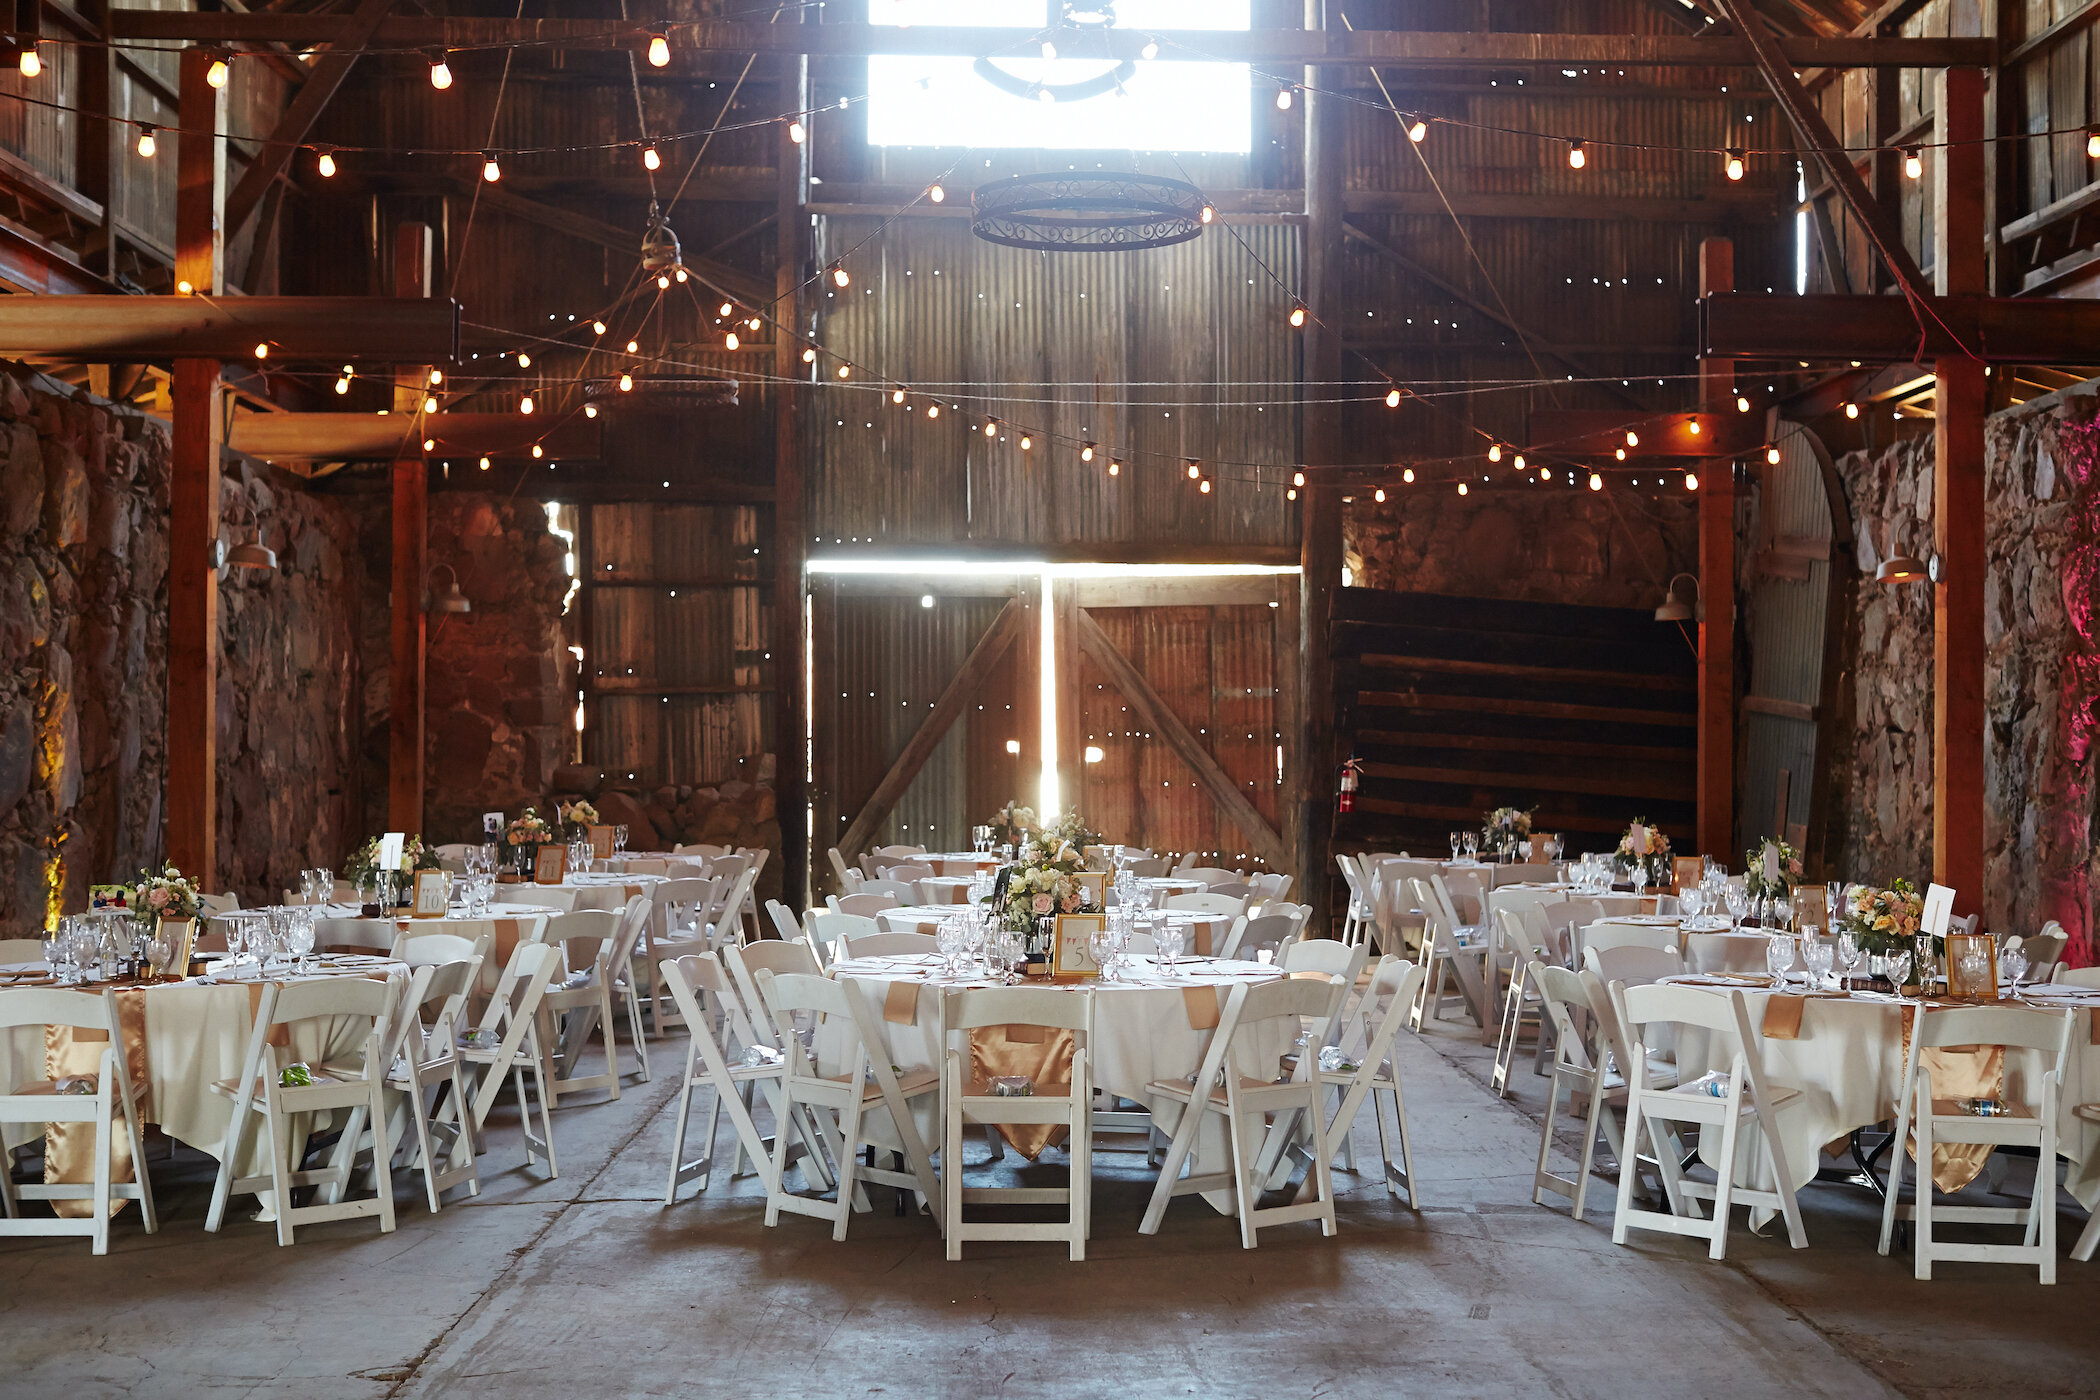 19 Rustic Barn Wedding Venues We Love In The United States Wedding Spot Blog